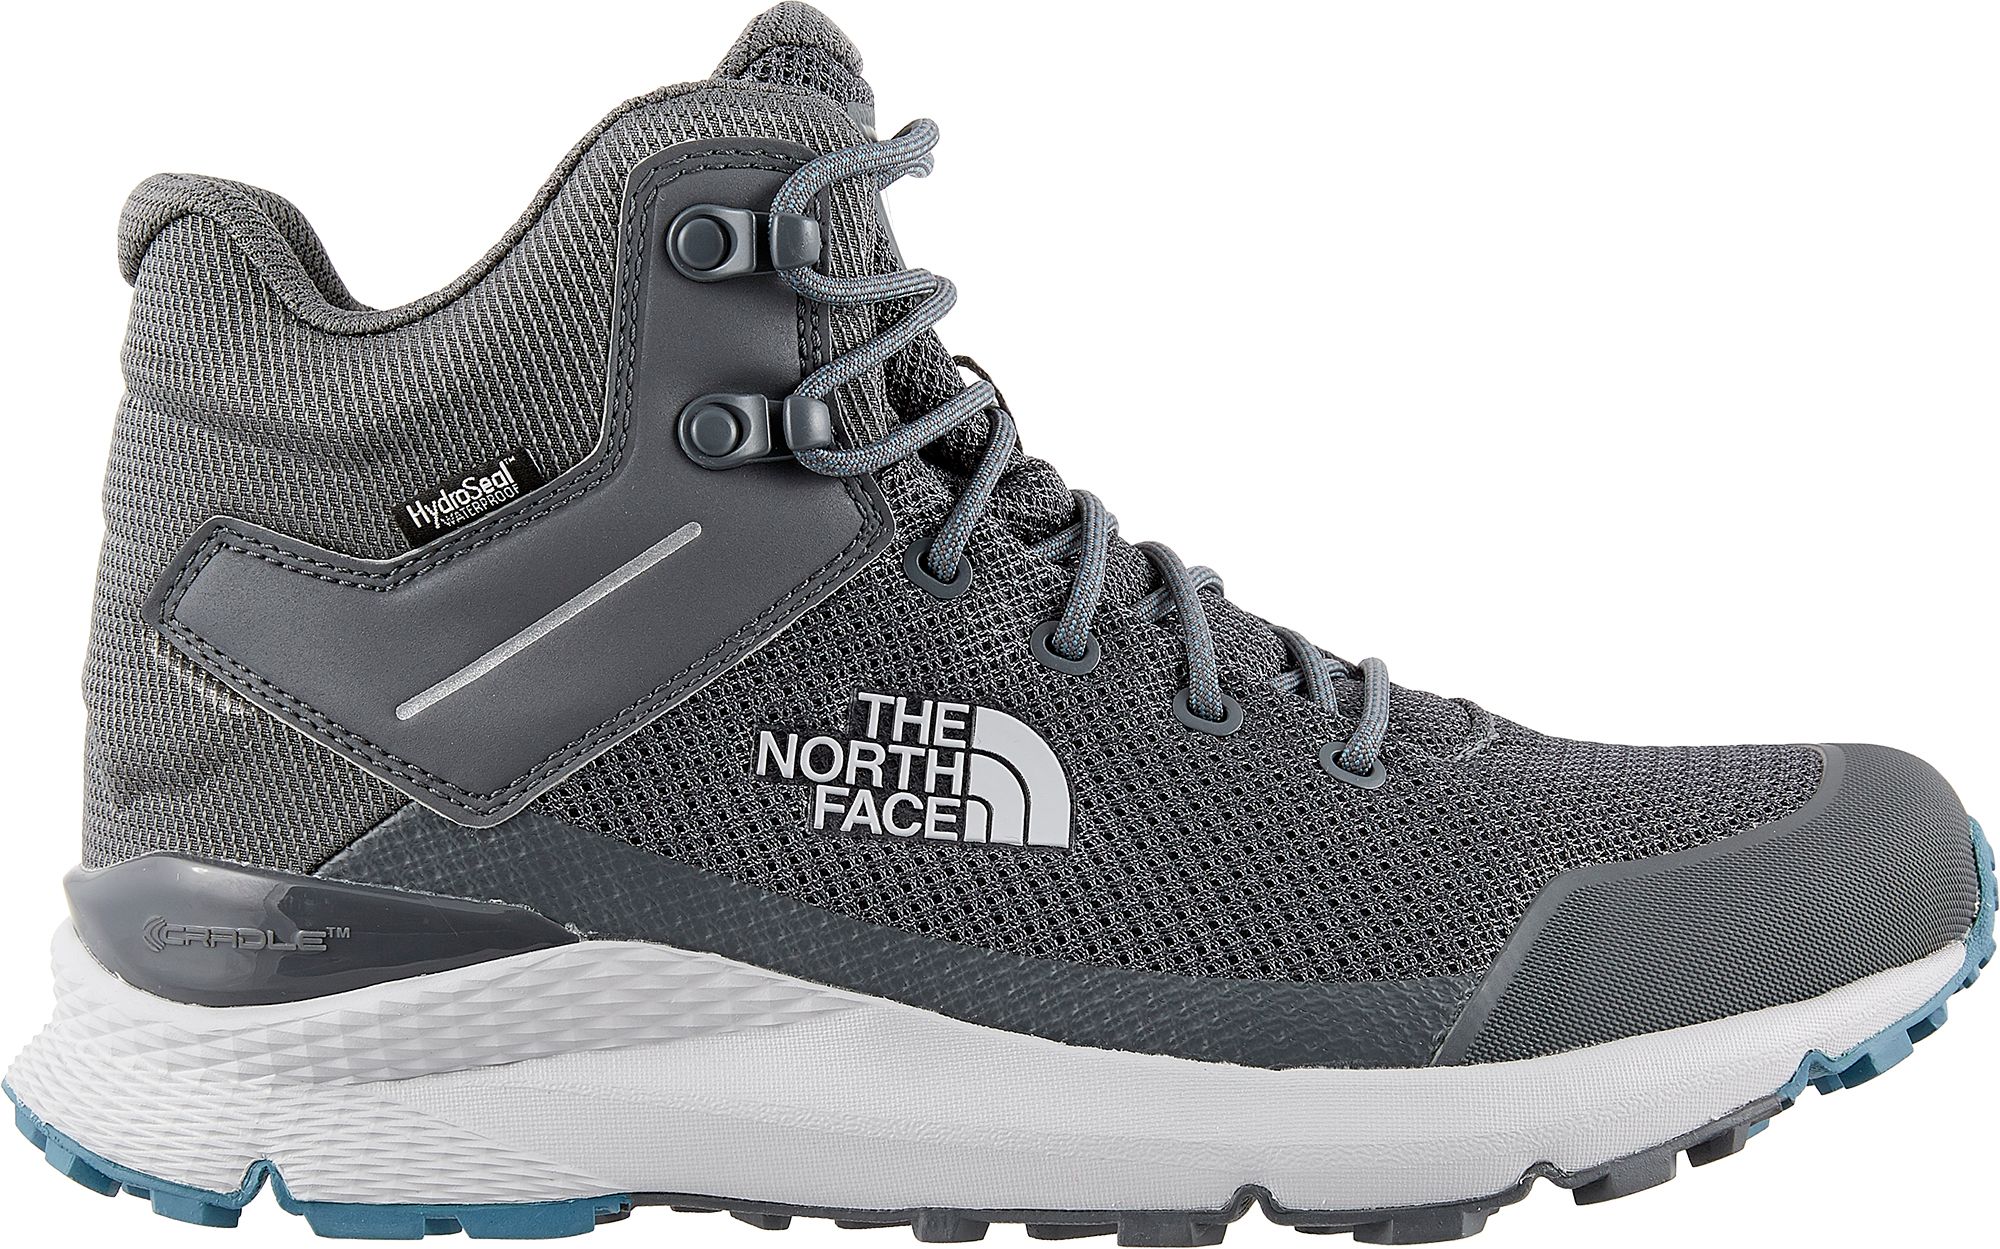 the north face women's vals waterproof hiking shoes